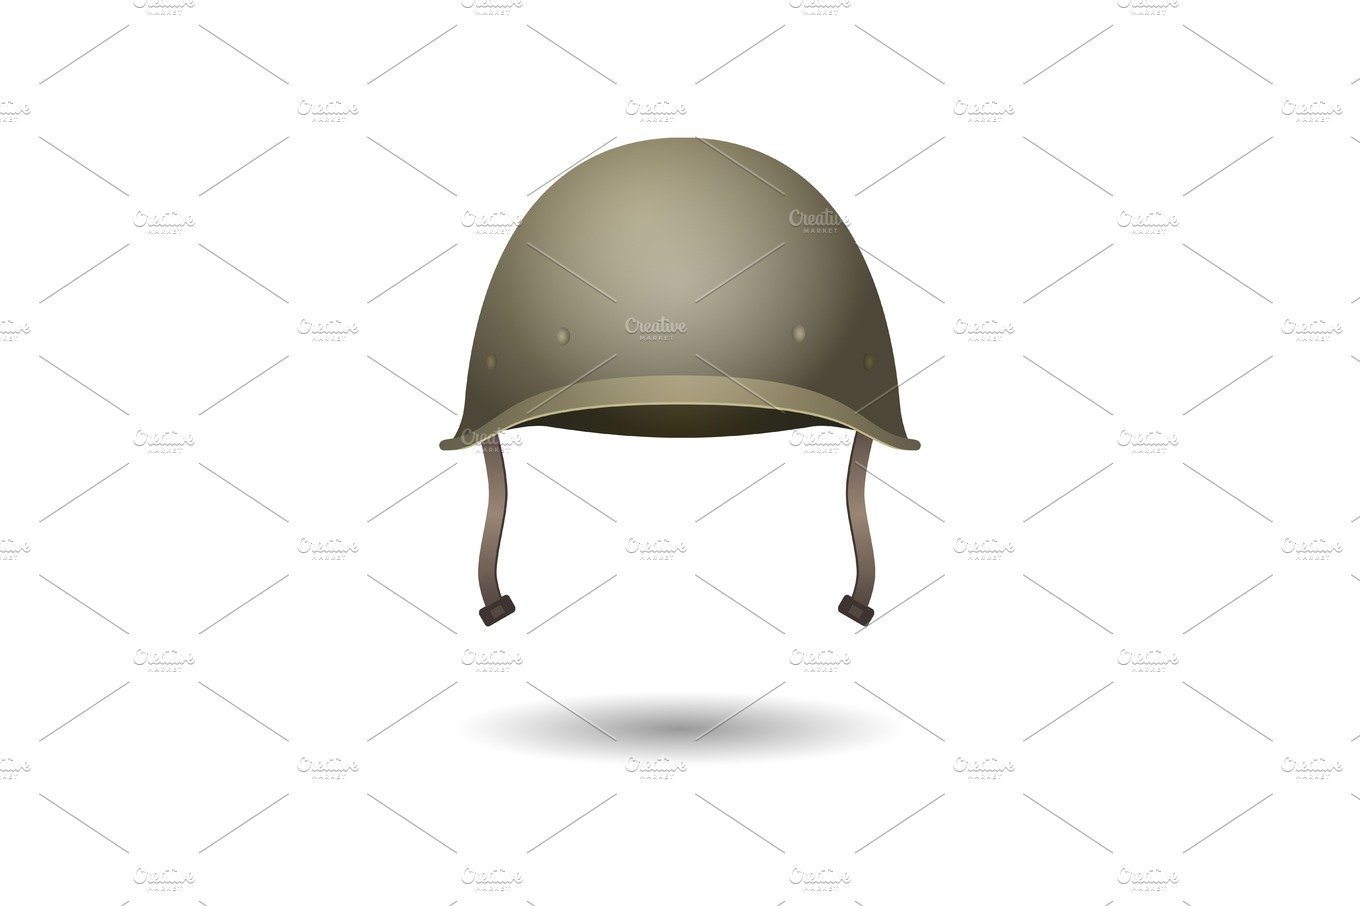 Military classical green helmet. Infantry wear of Second World War cover image.